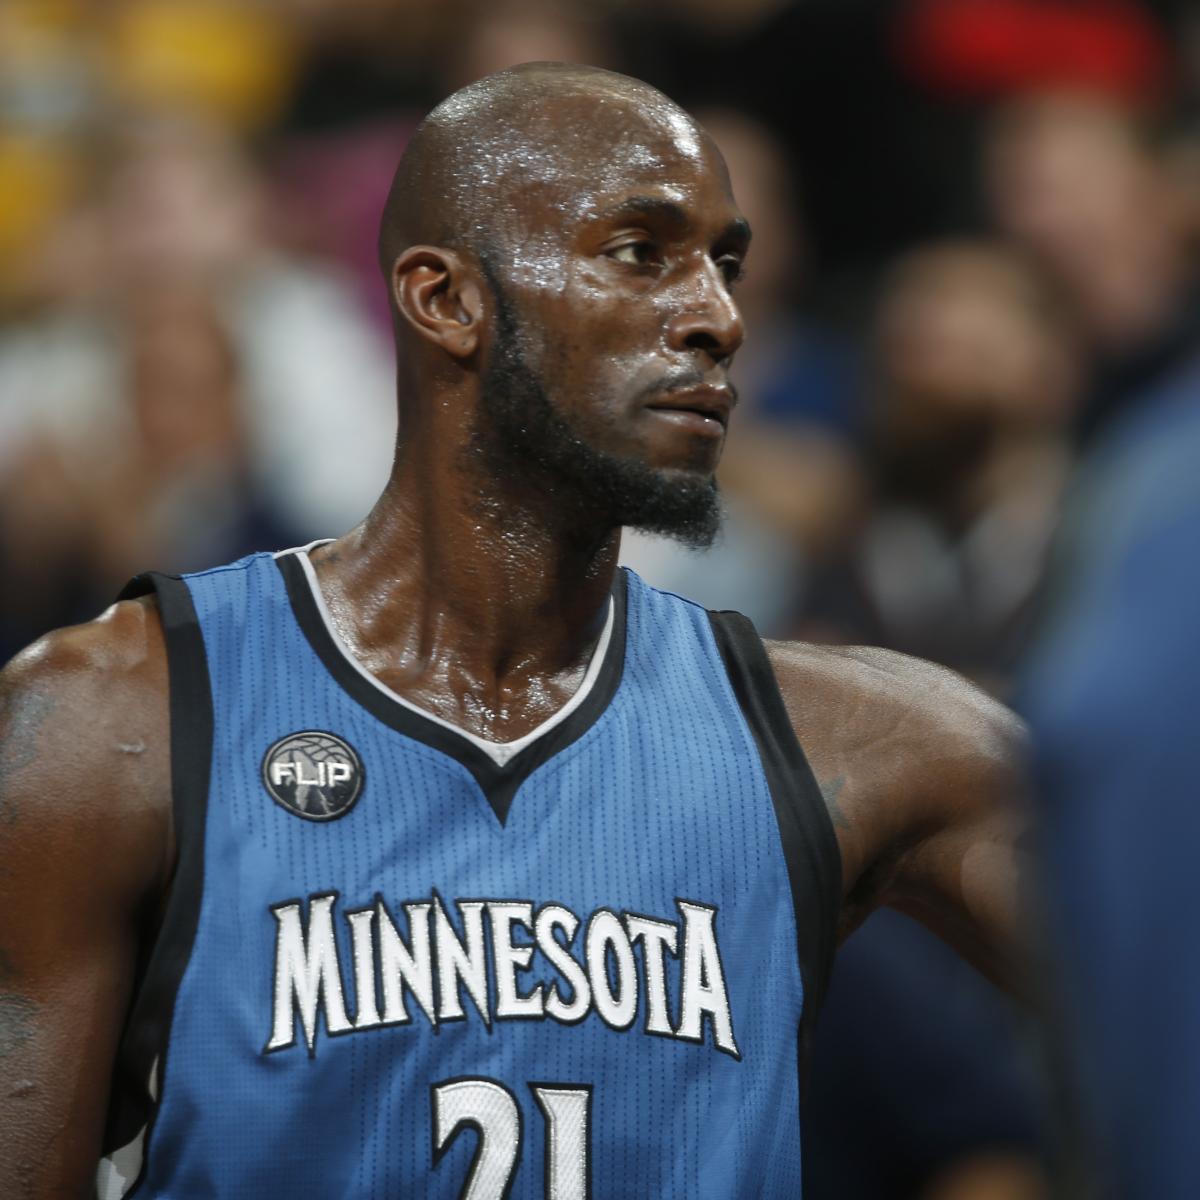 Crazy Stats - Kevin Garnett and Karl Malone are the only